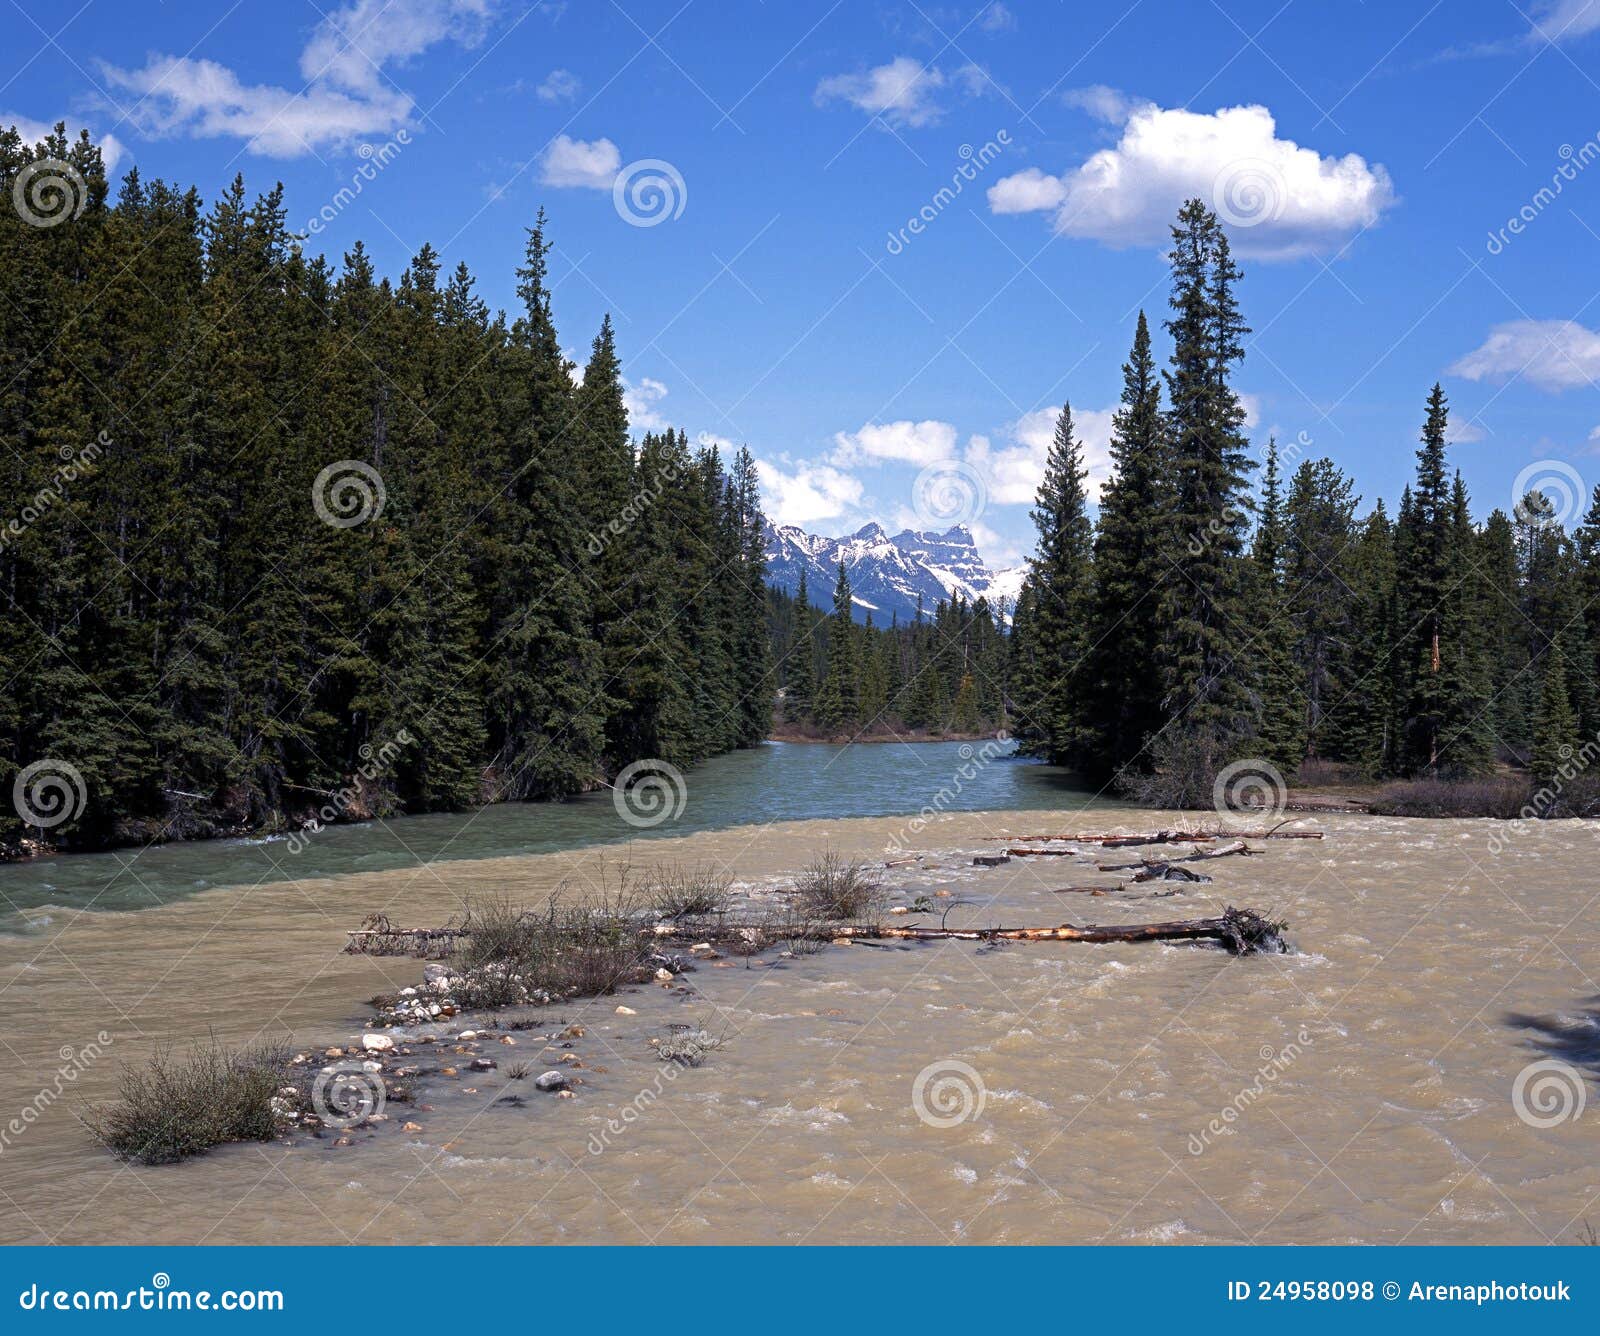 Bow River Banff National Park Canada Stock Photo Image Of River